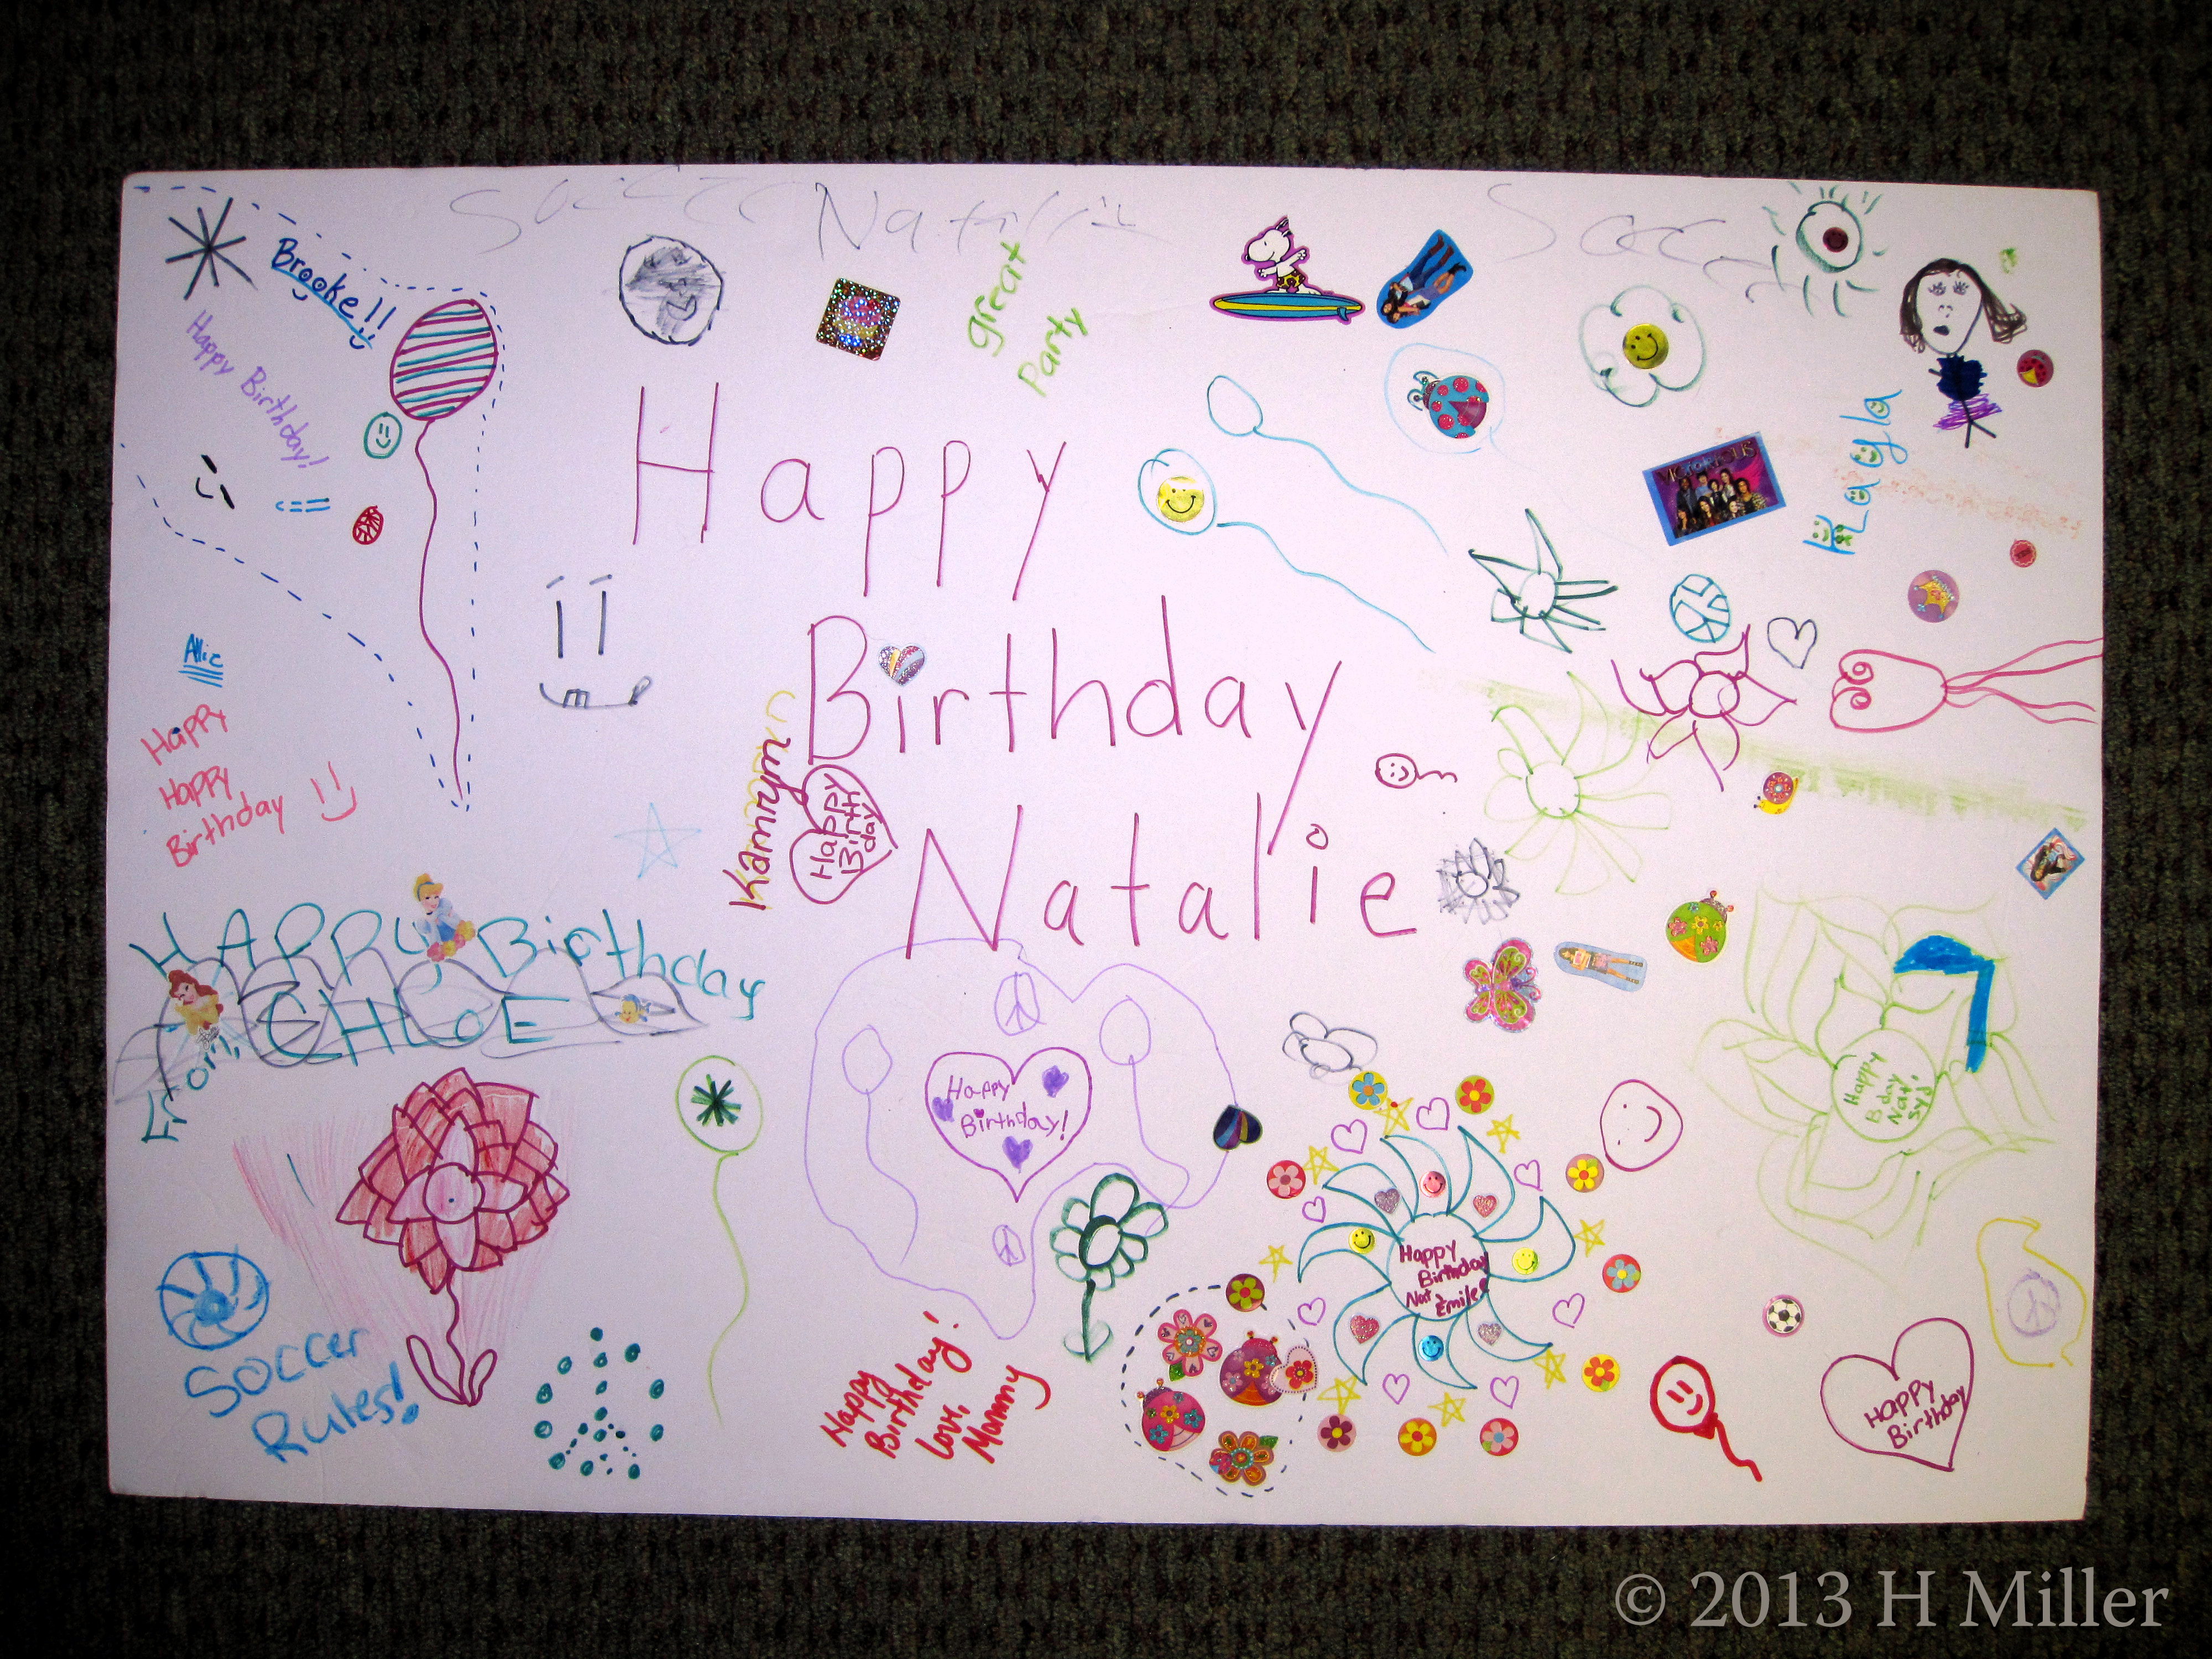 Natalie's Spa Birthday Card Signed By Everyone! 